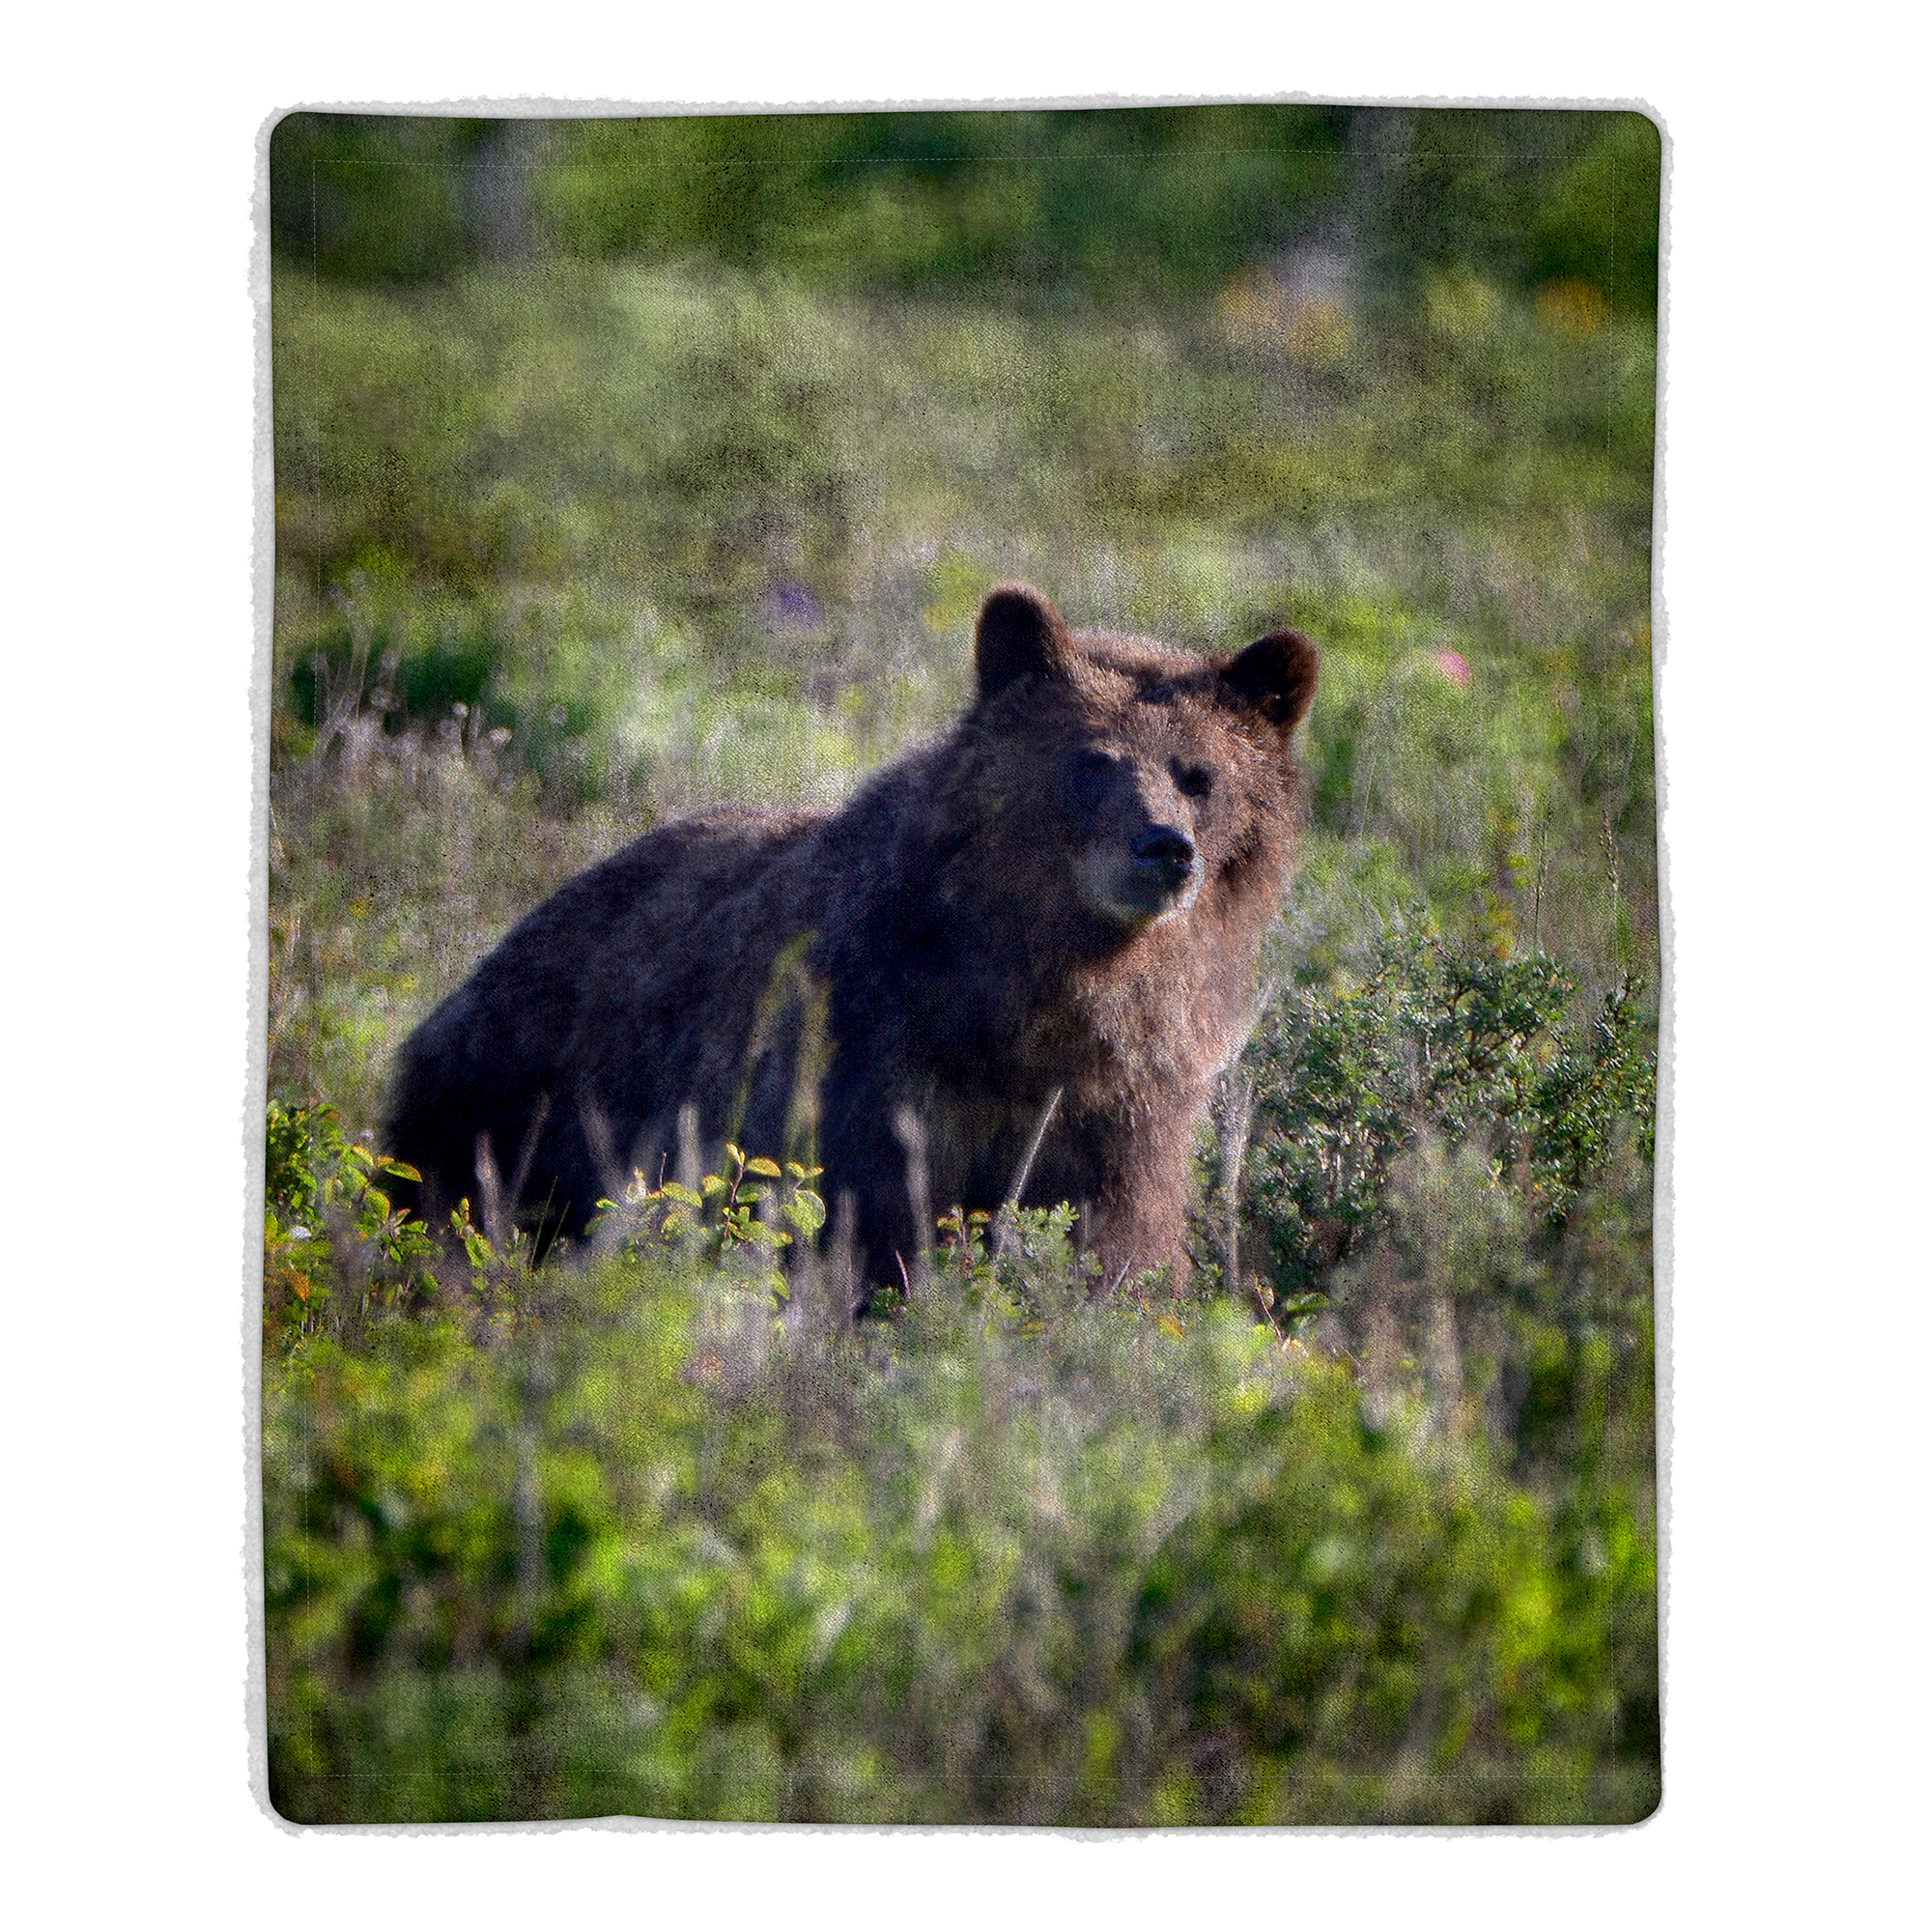 Fluffy Plush Throw Blanket 50 X 60 Inch- Grizzly Bear Print Lightweight Hypoallergenic Bed Or Couch Soft Plush